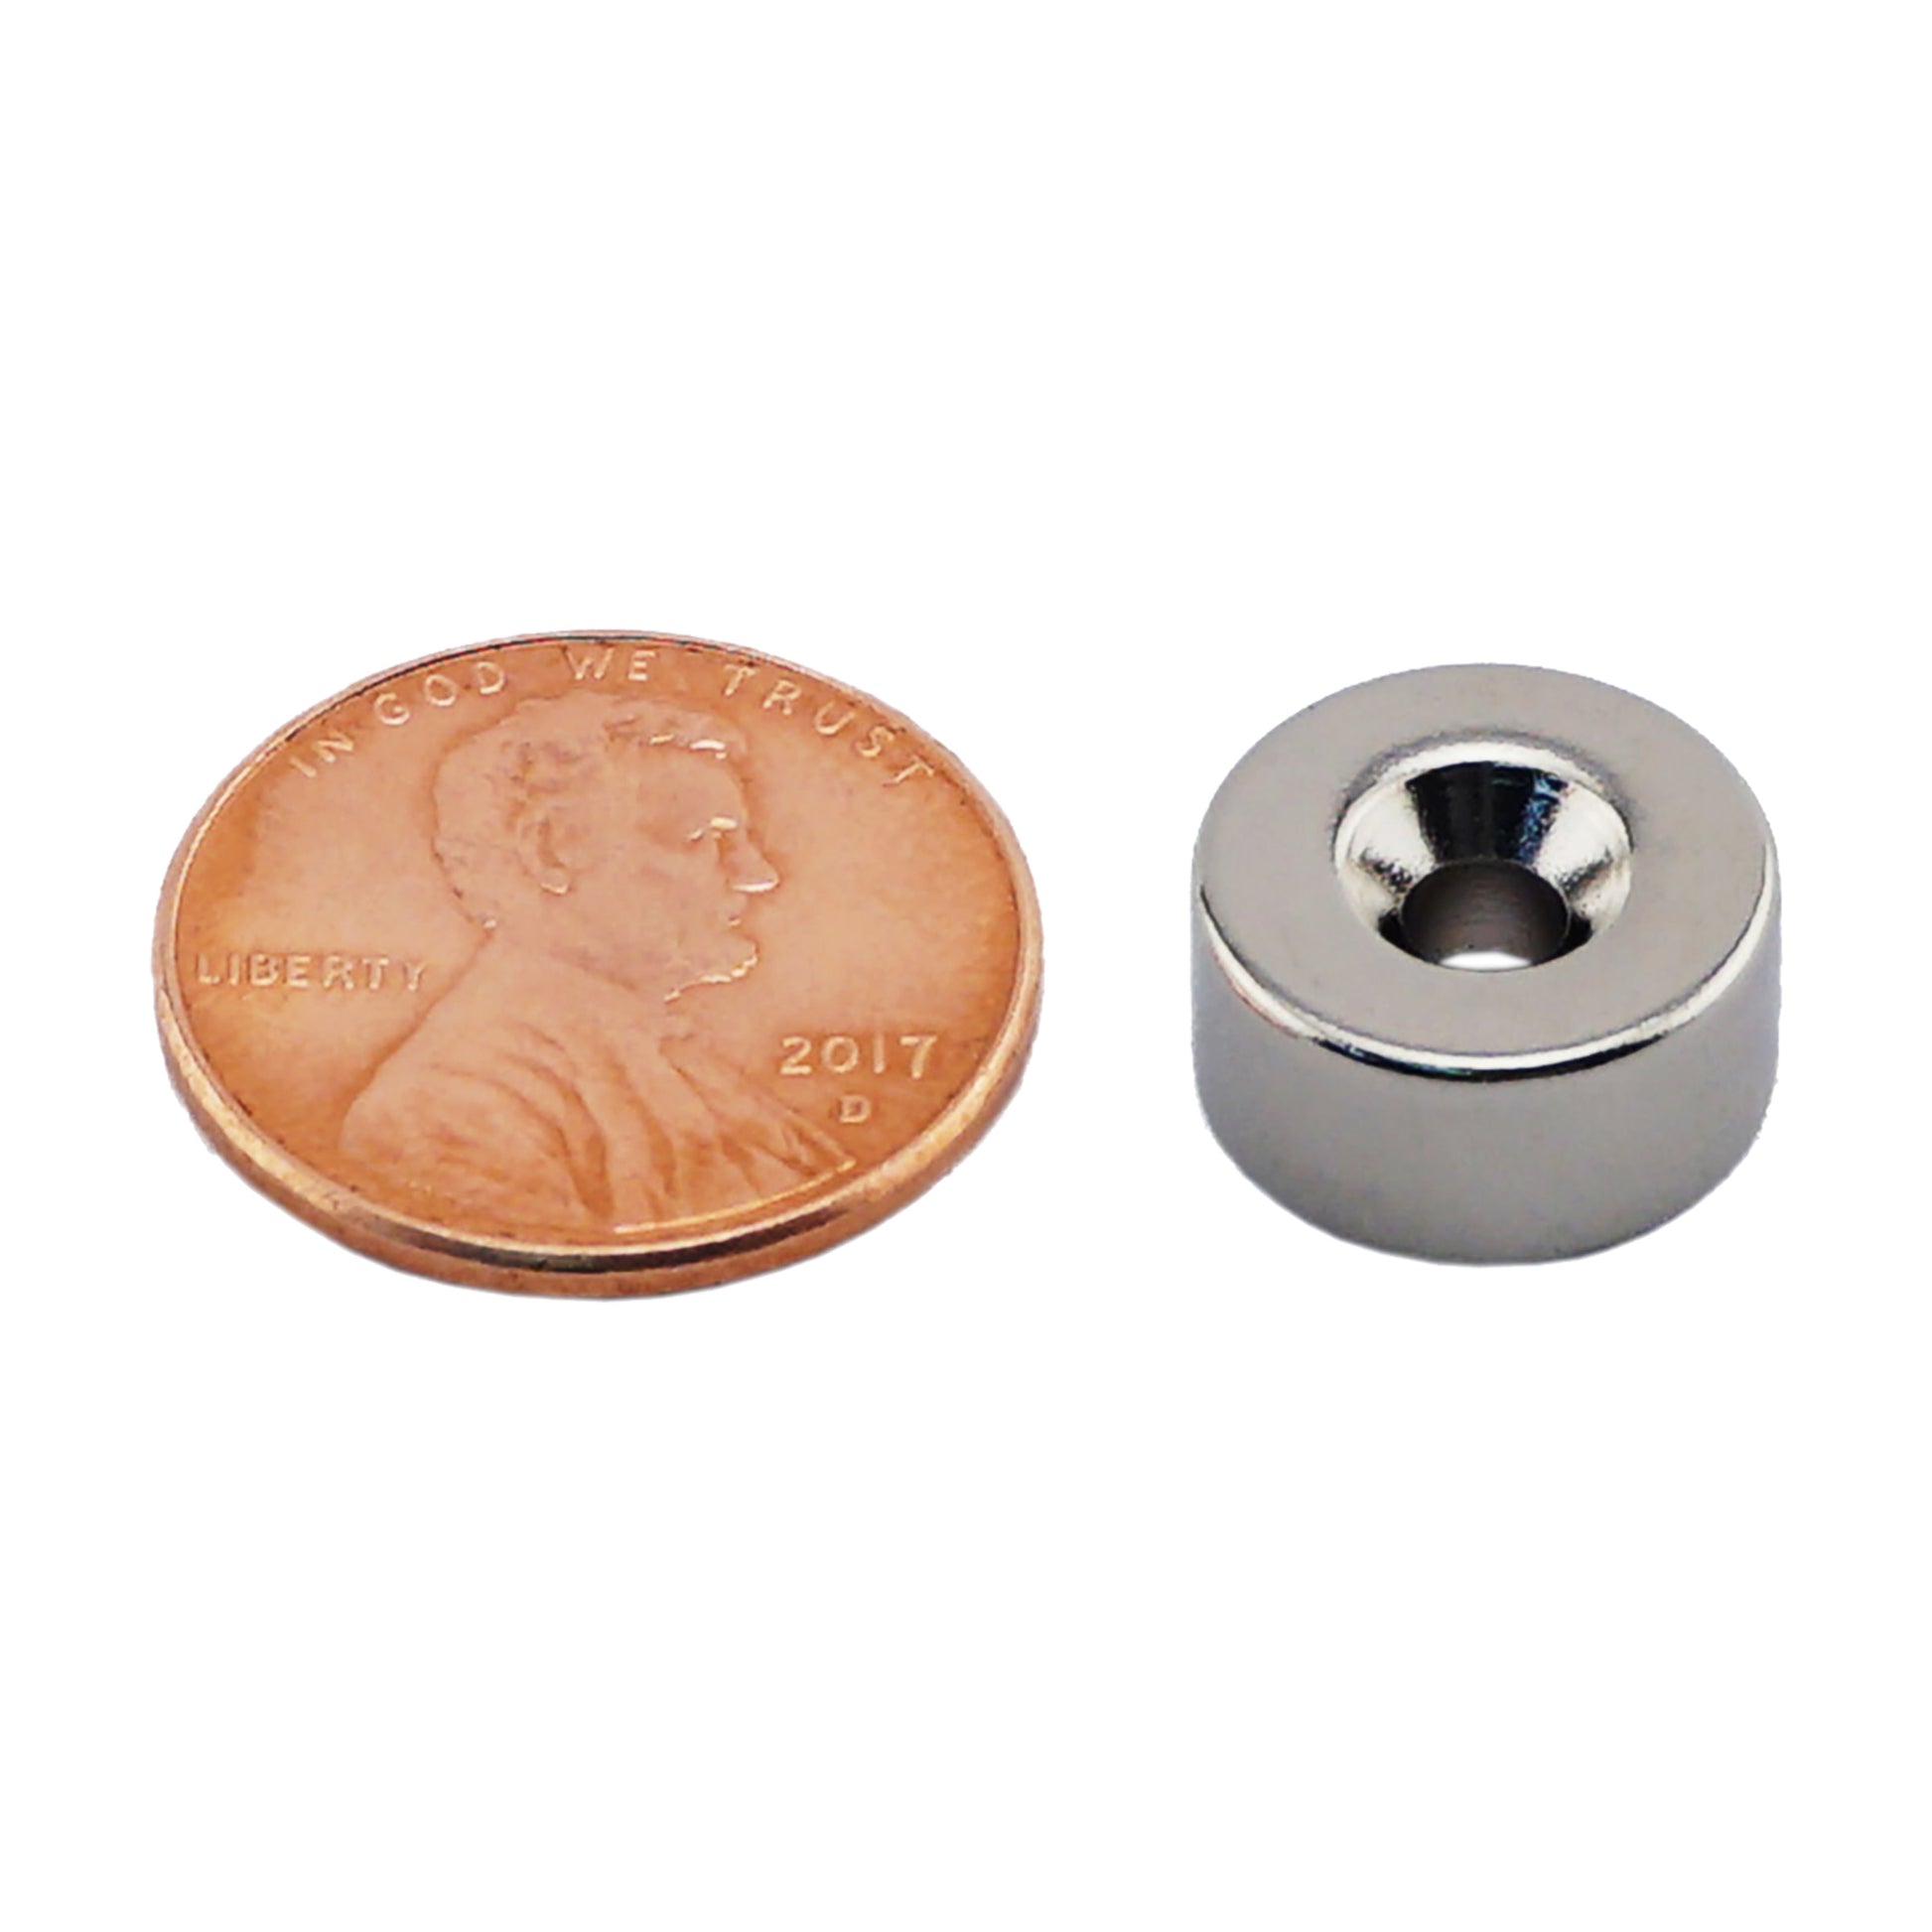 Load image into Gallery viewer, NR005020NCTS Neodymium Countersunk Ring Magnet - Compared to Penny for Size Reference